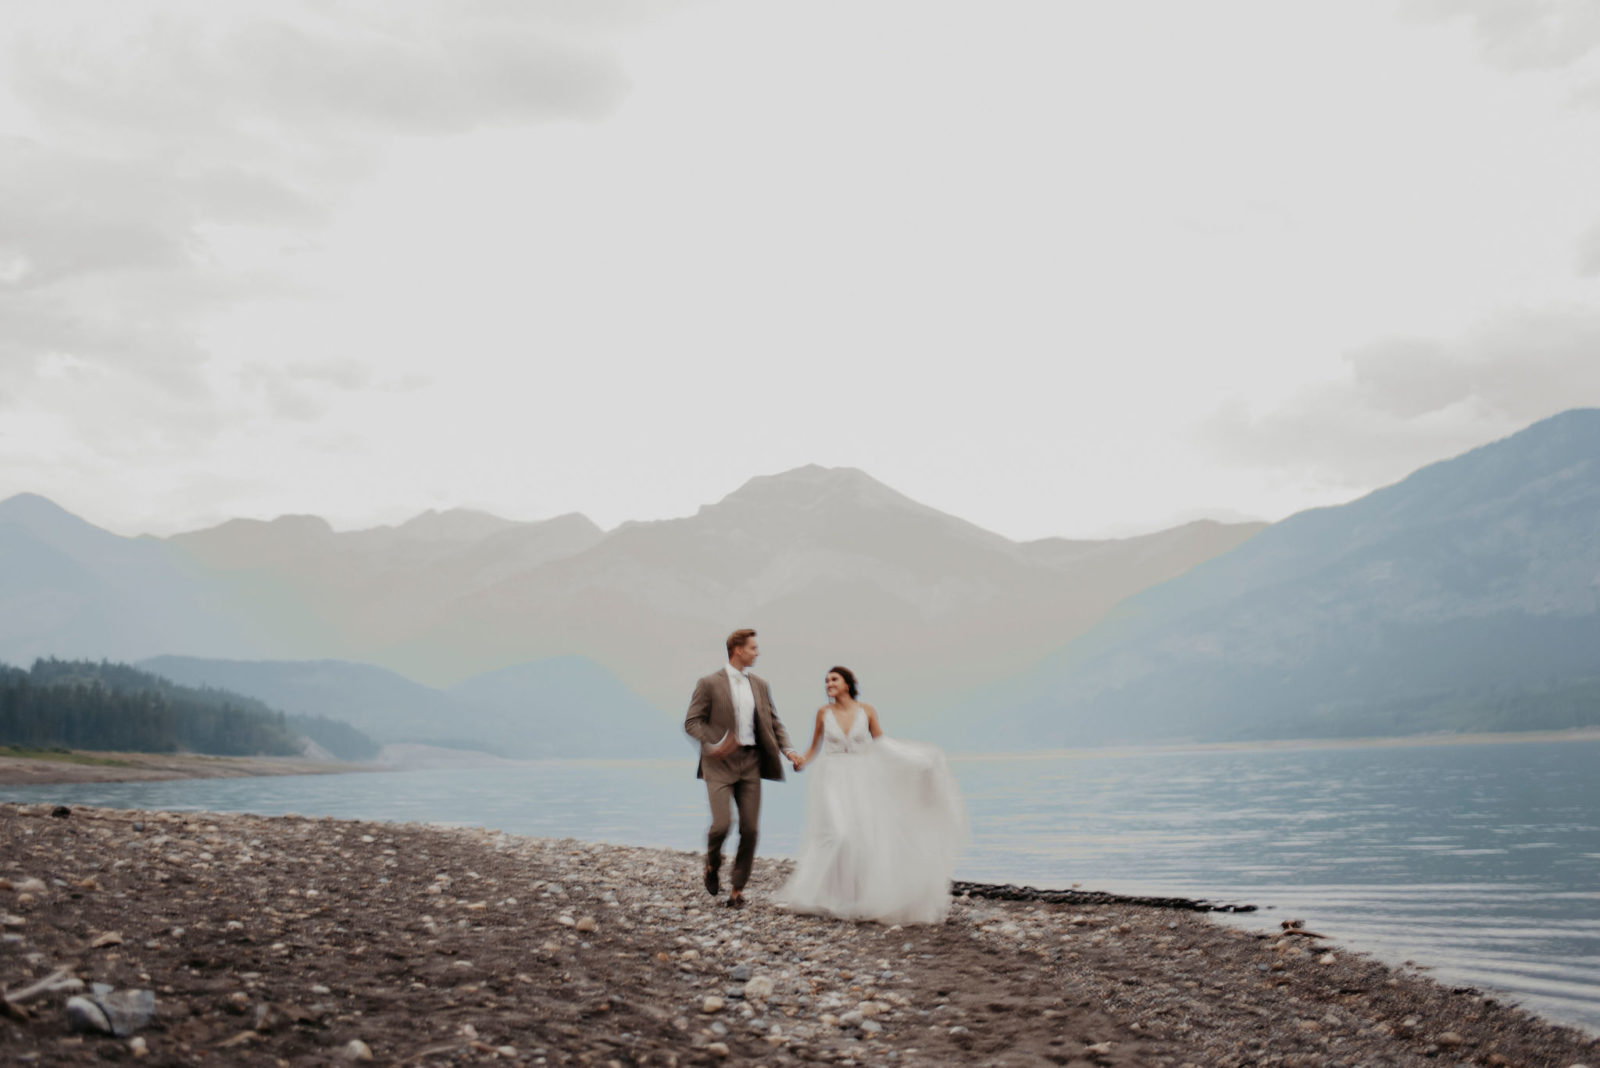 Blue hour wedding portraits in the mountains